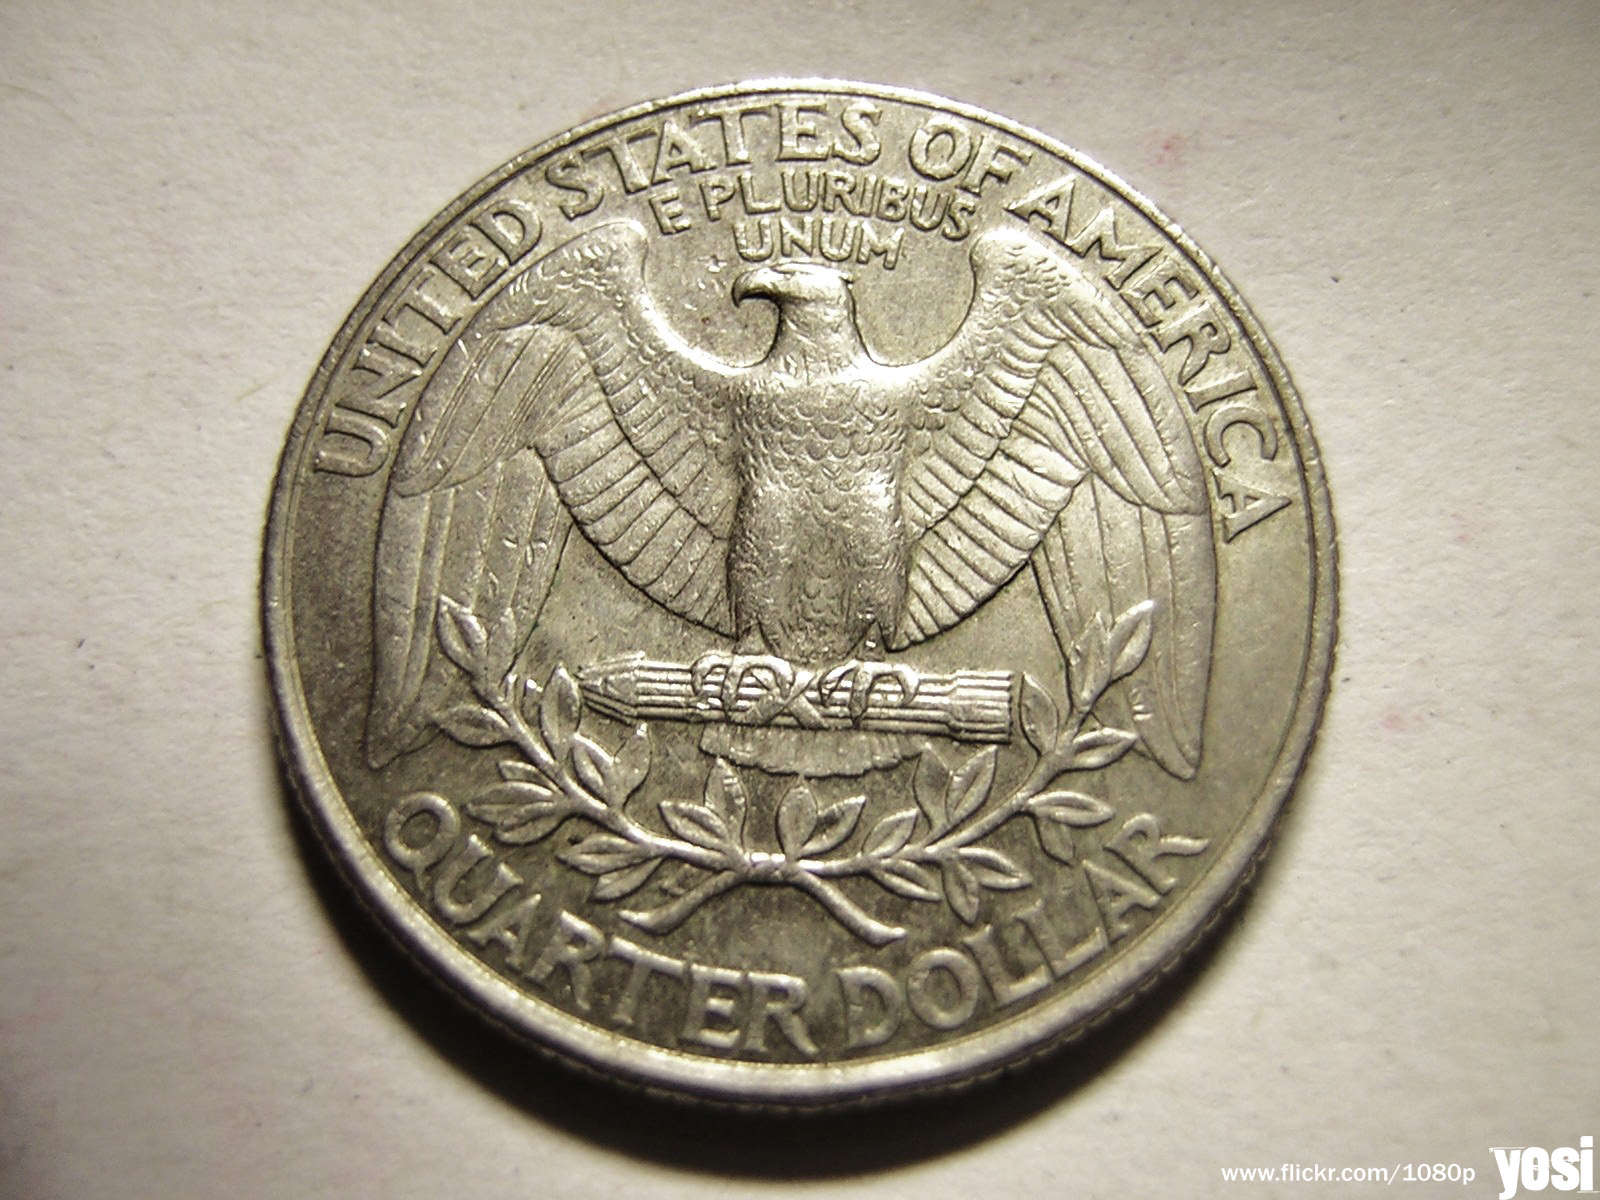 an old us coin showing an eagle in the center